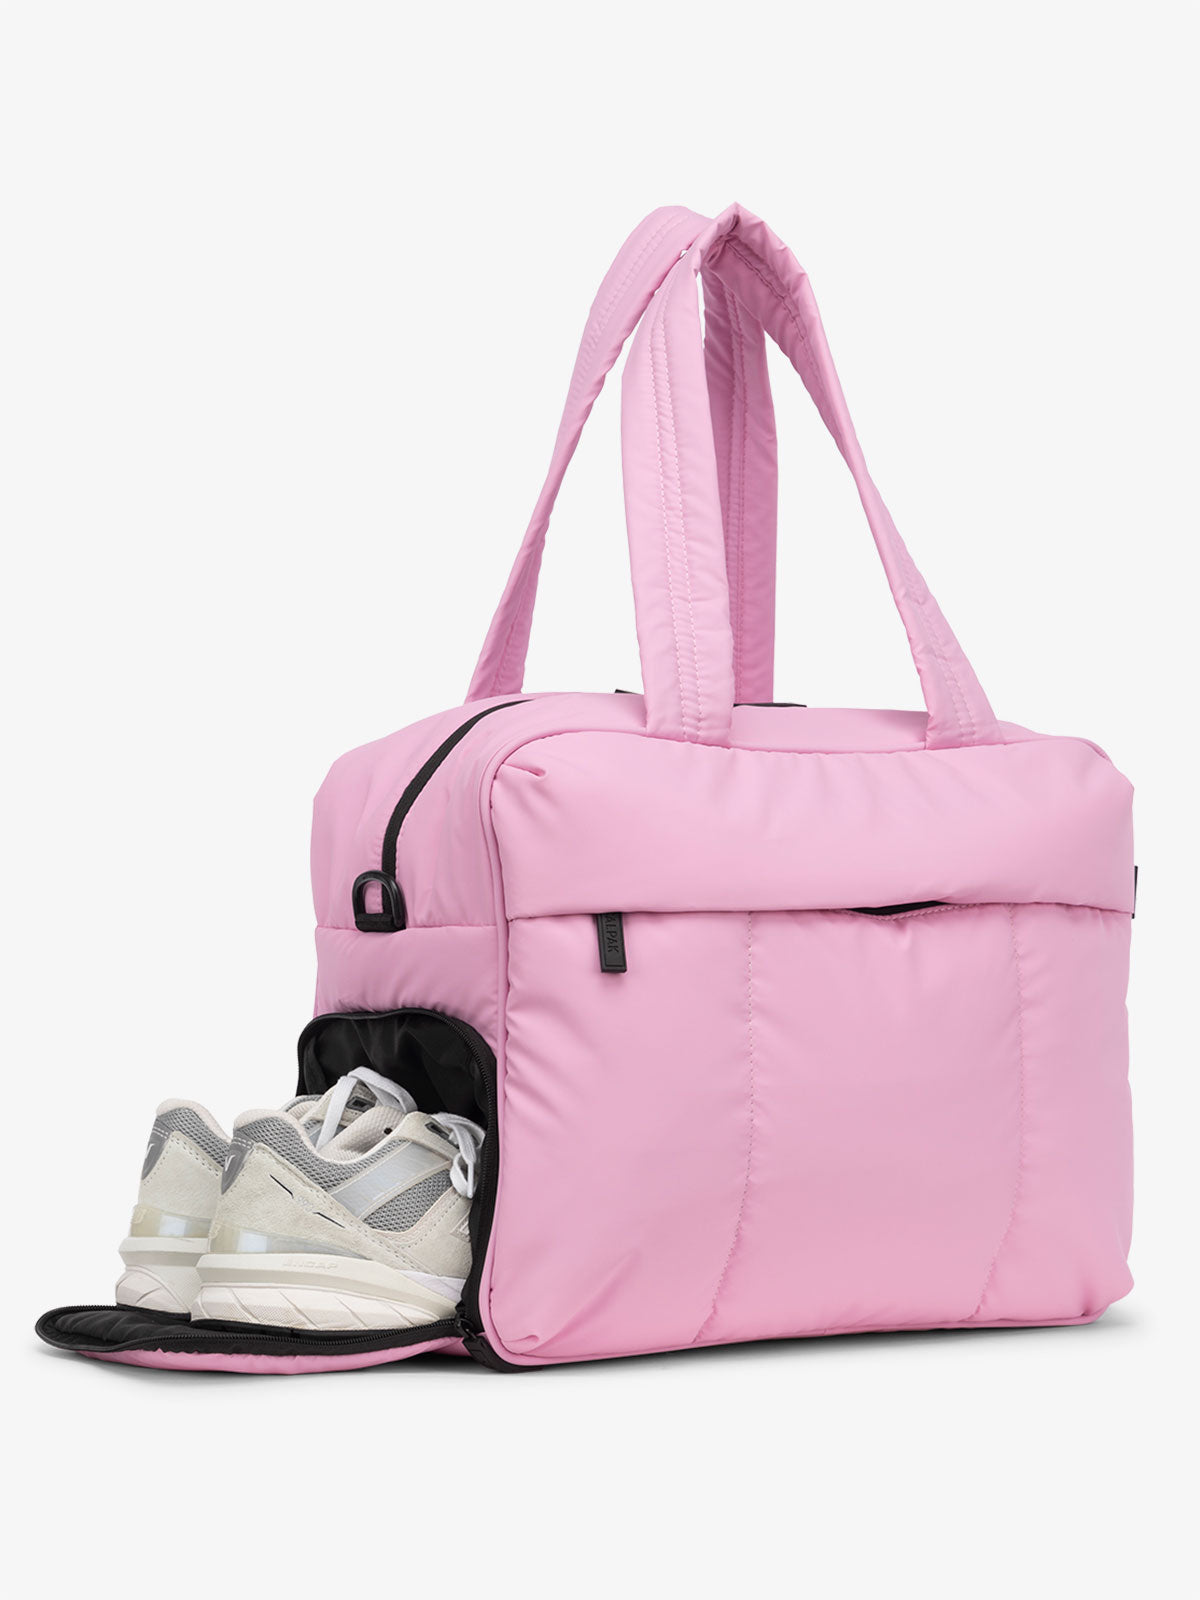 CALPAK Luka Duffel Bag with side shoe compartment and top handles in bubblegum pink